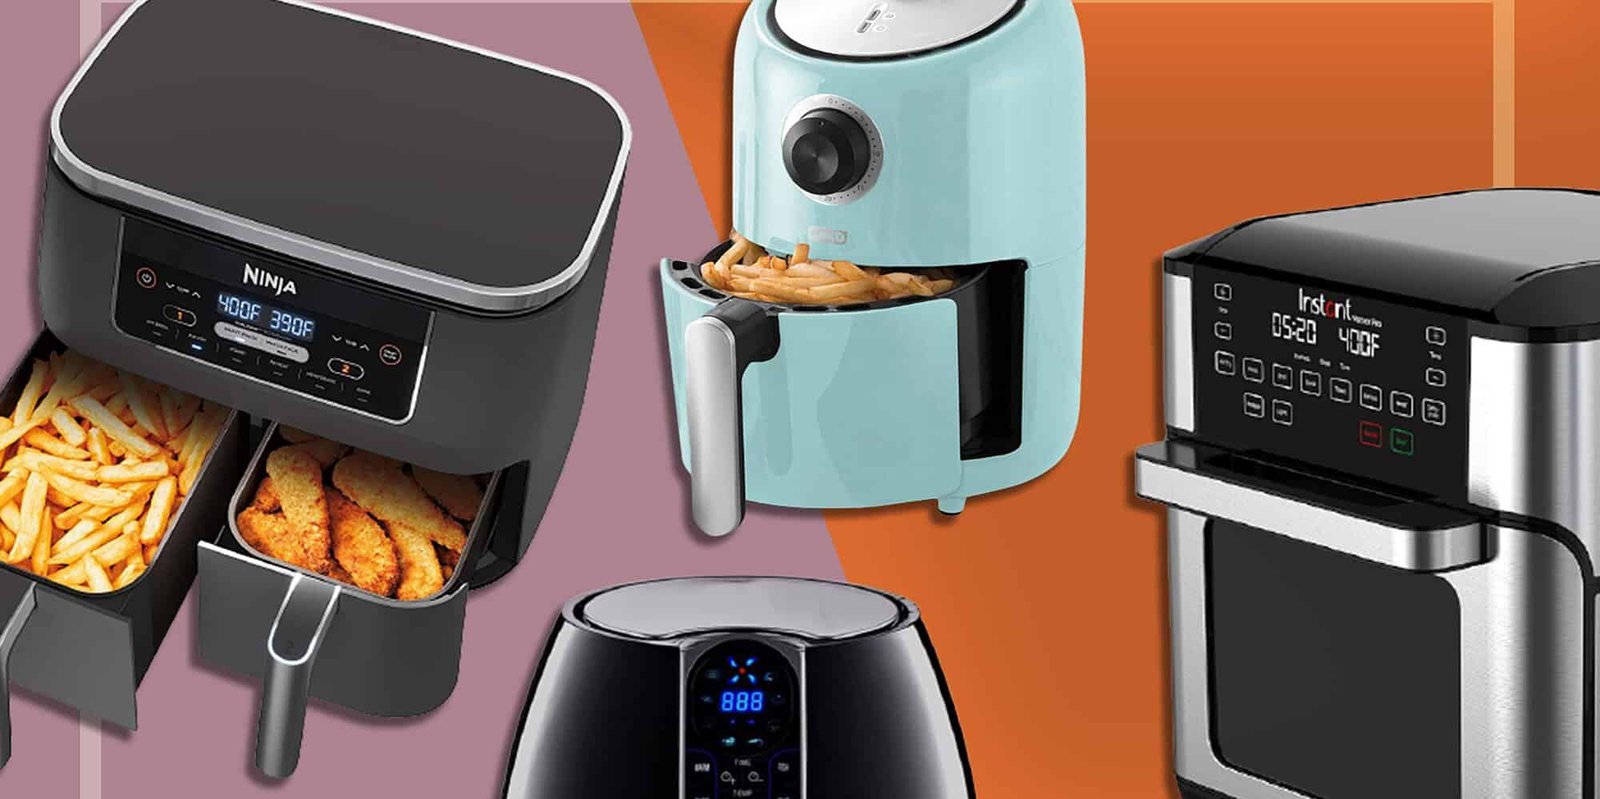 8 Best Air Fryers 2021 According To Reviews Home Chef Ninja